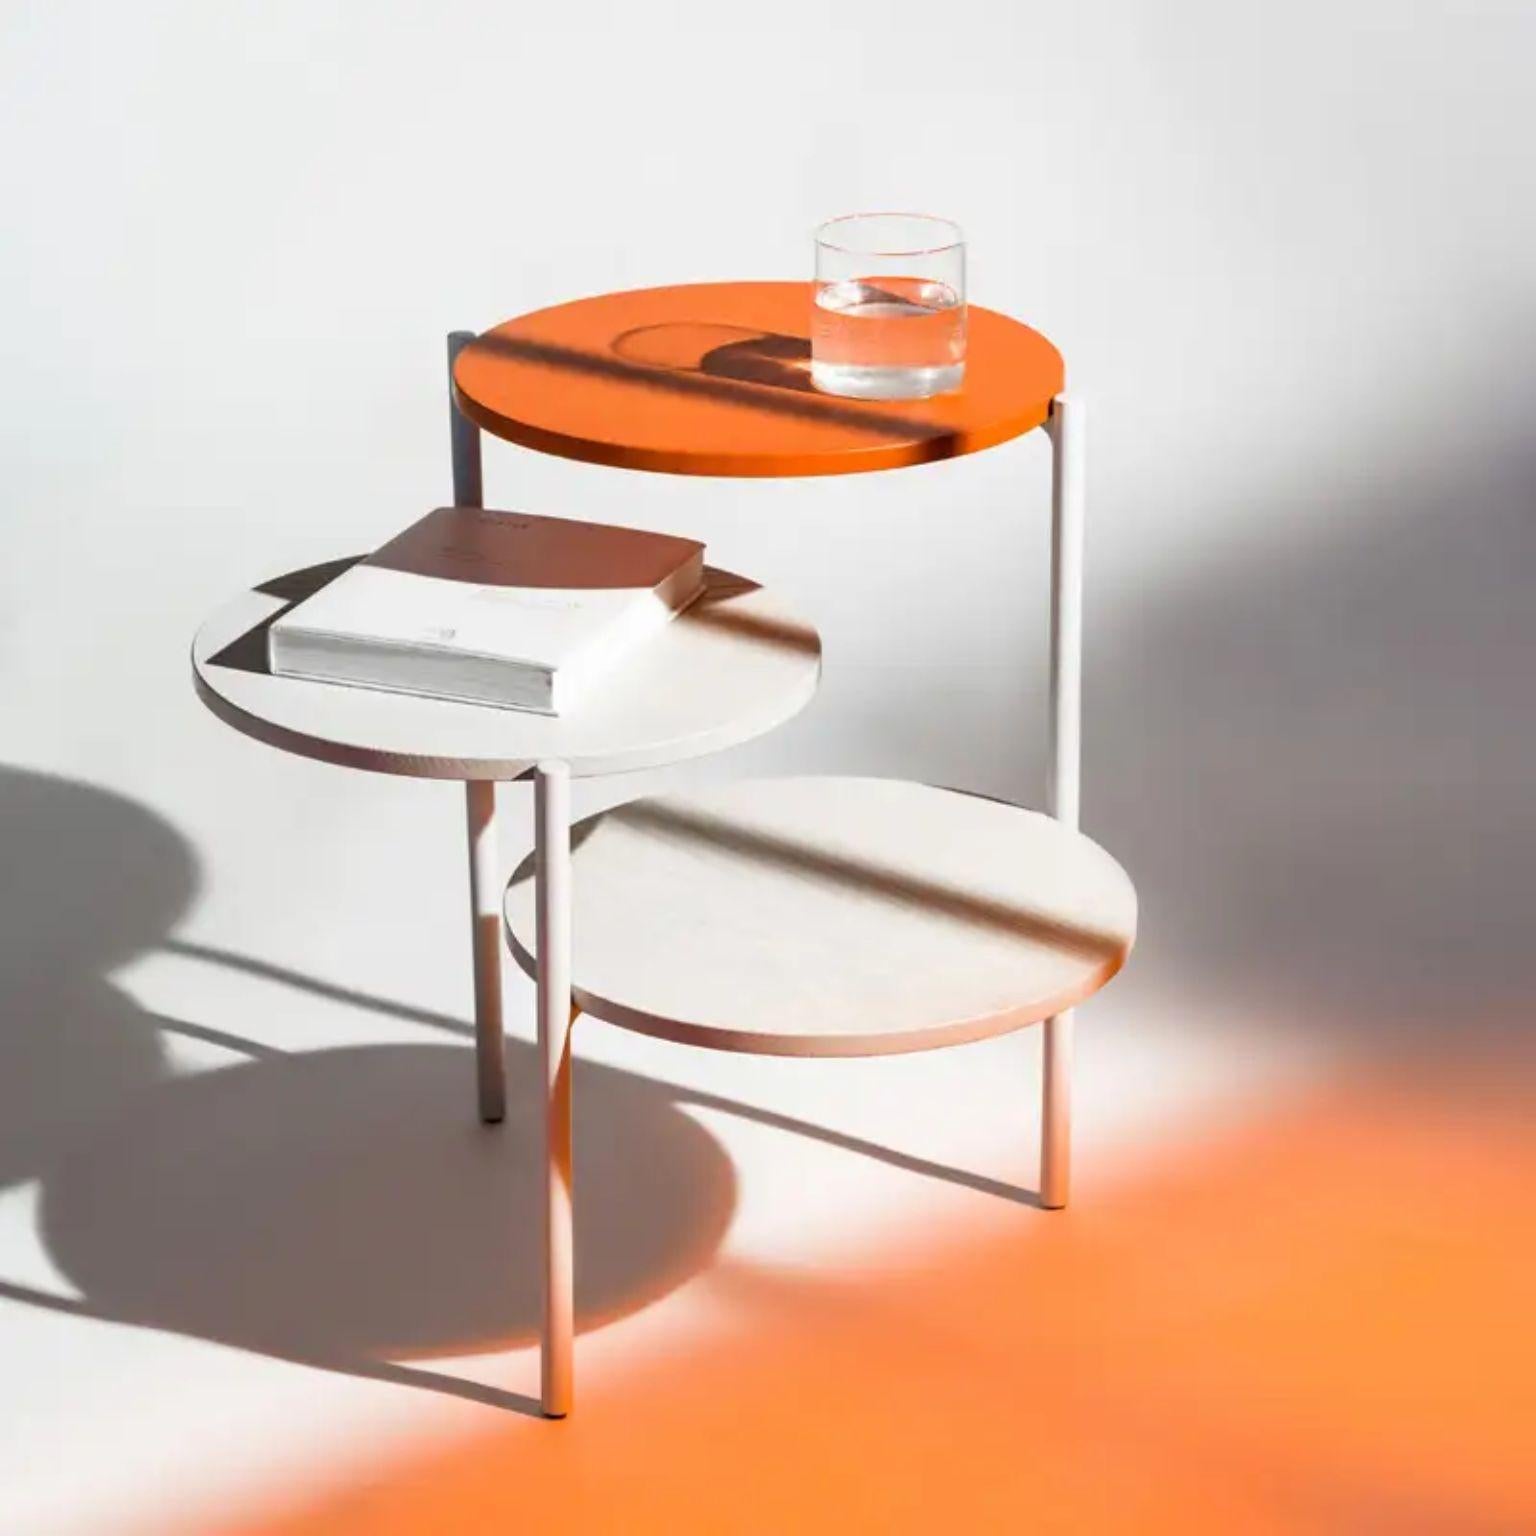 Triplo White and orange coffee table by Mason Editions
Designed by Martina Bartoli.
Dimensions: Ø 54 cm x H 52.5 cm.
Materials: Ash solid wood and metal.

Available in different colors and finishes. 

A design based on the concept of